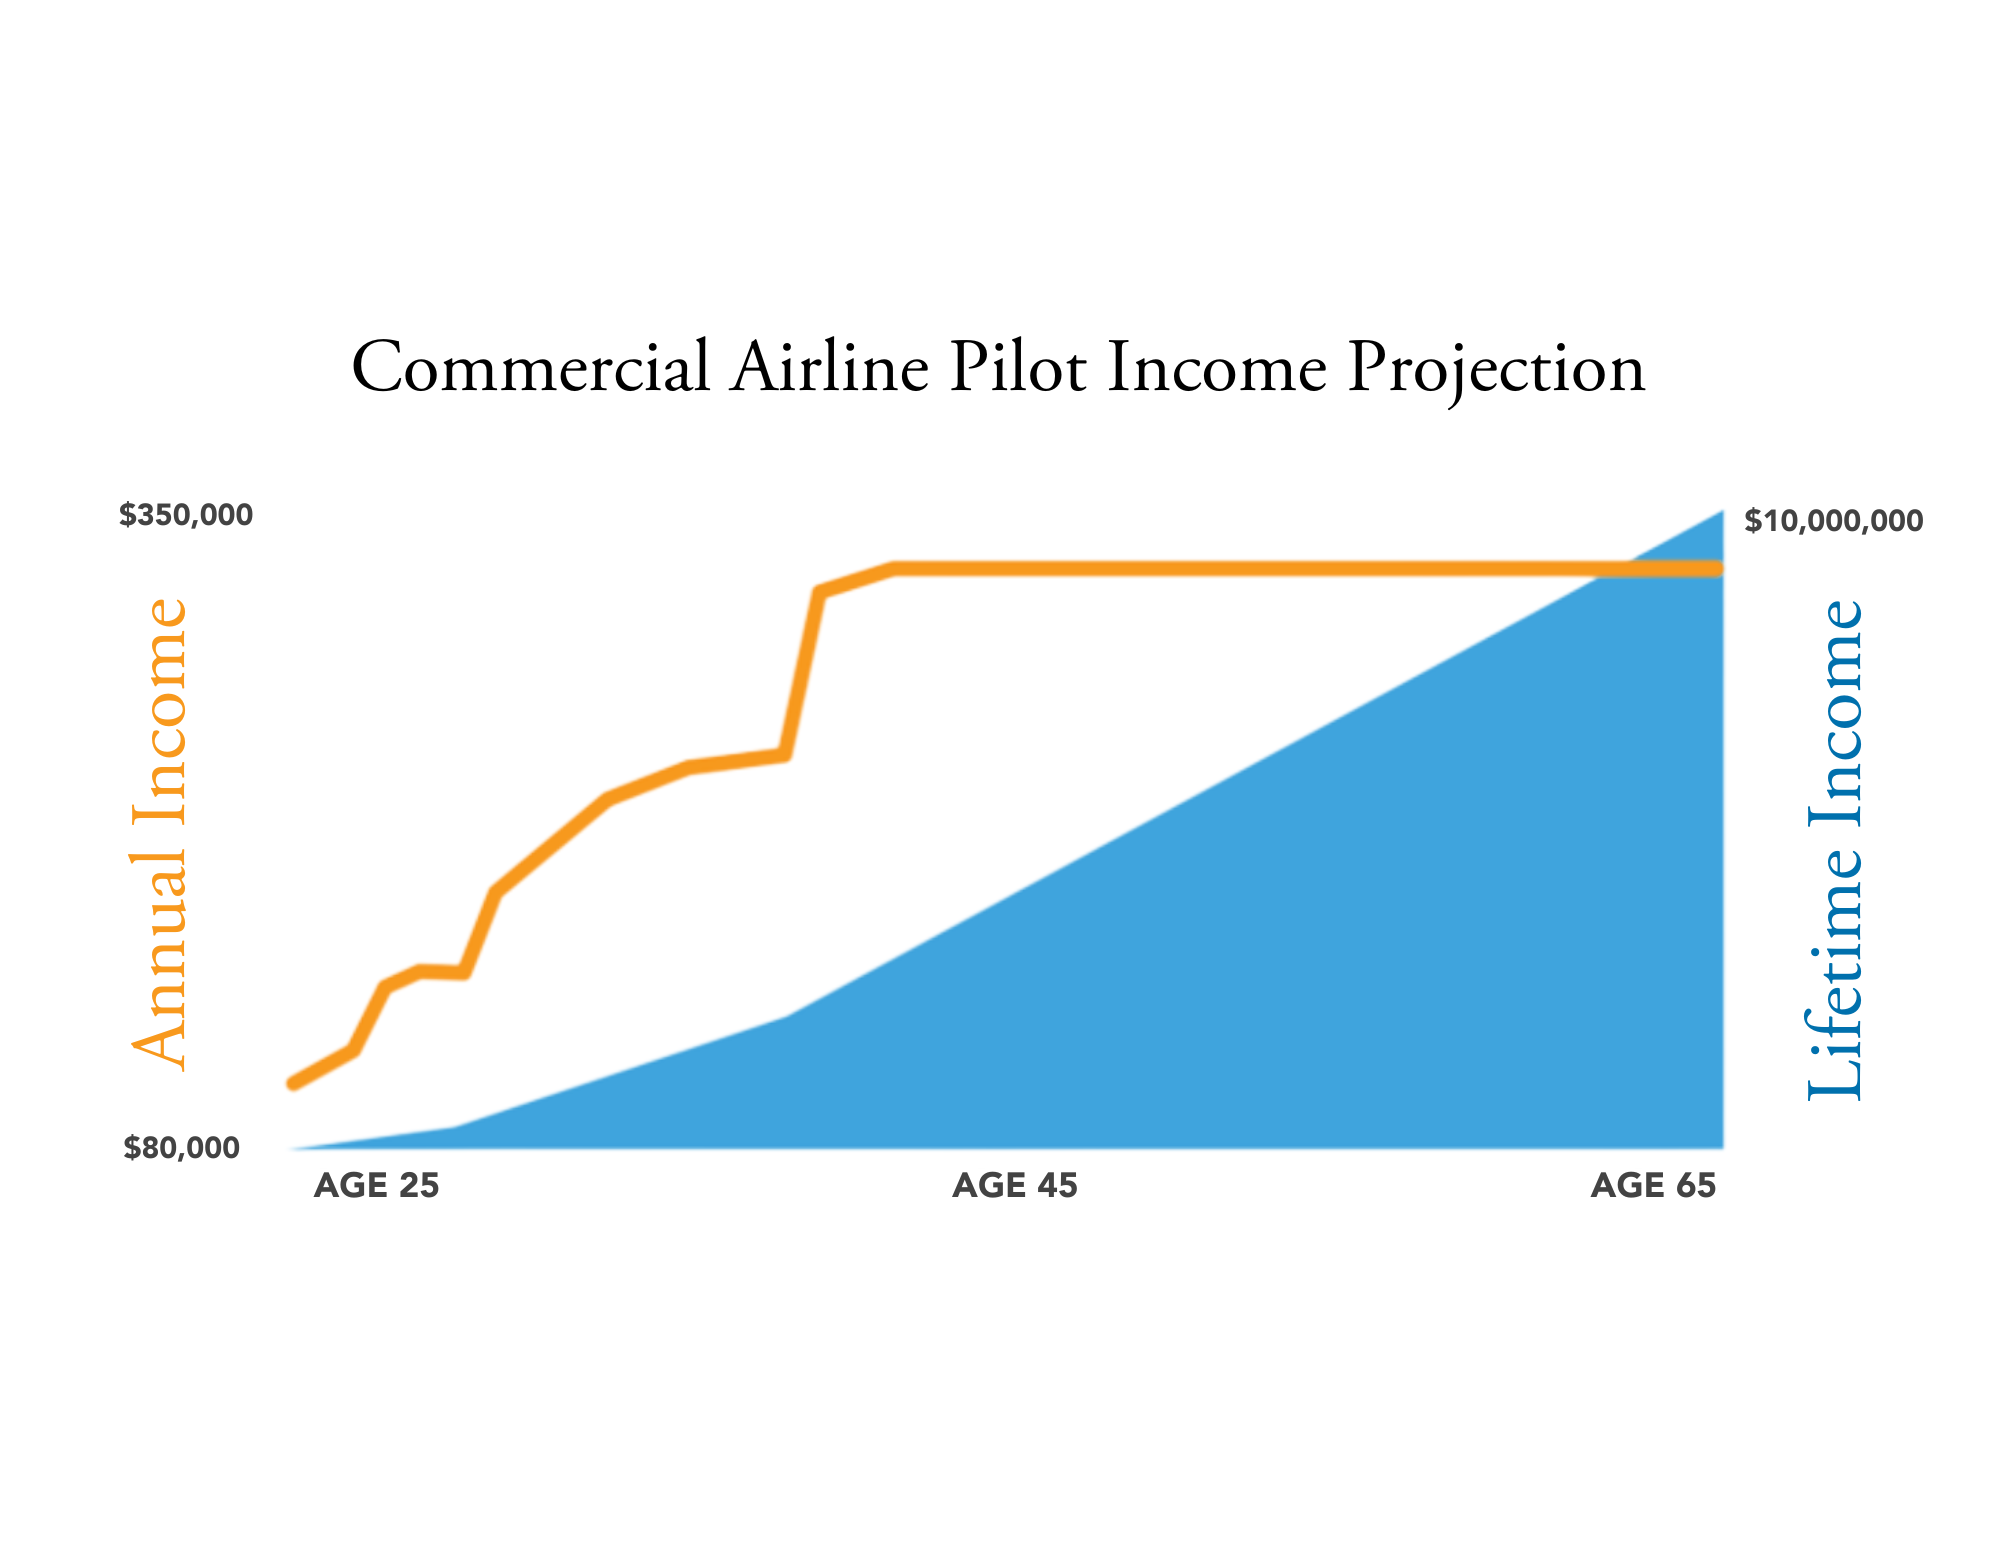 What is the Average Commercial Airline Pilot Salary in the U.S.?